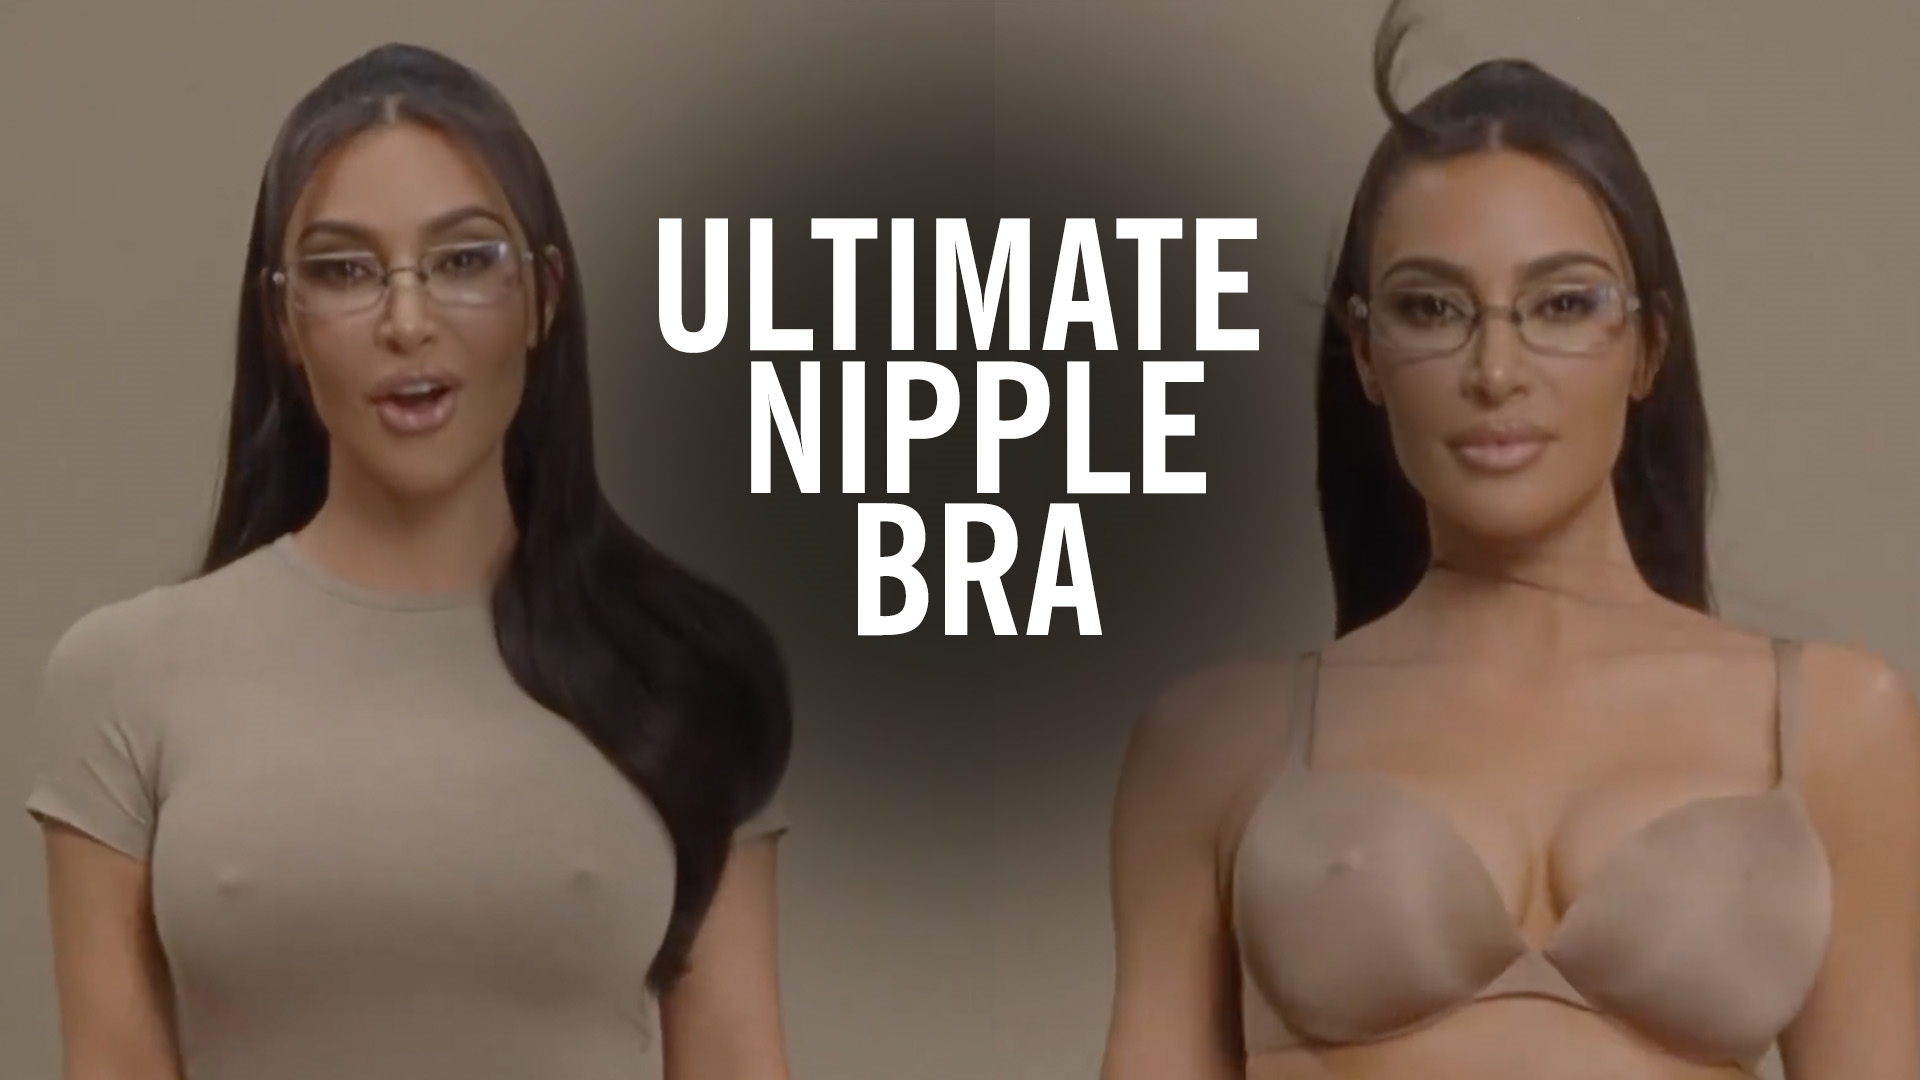 Why is the nip bra the best marketing idea for skims? #greenscreen